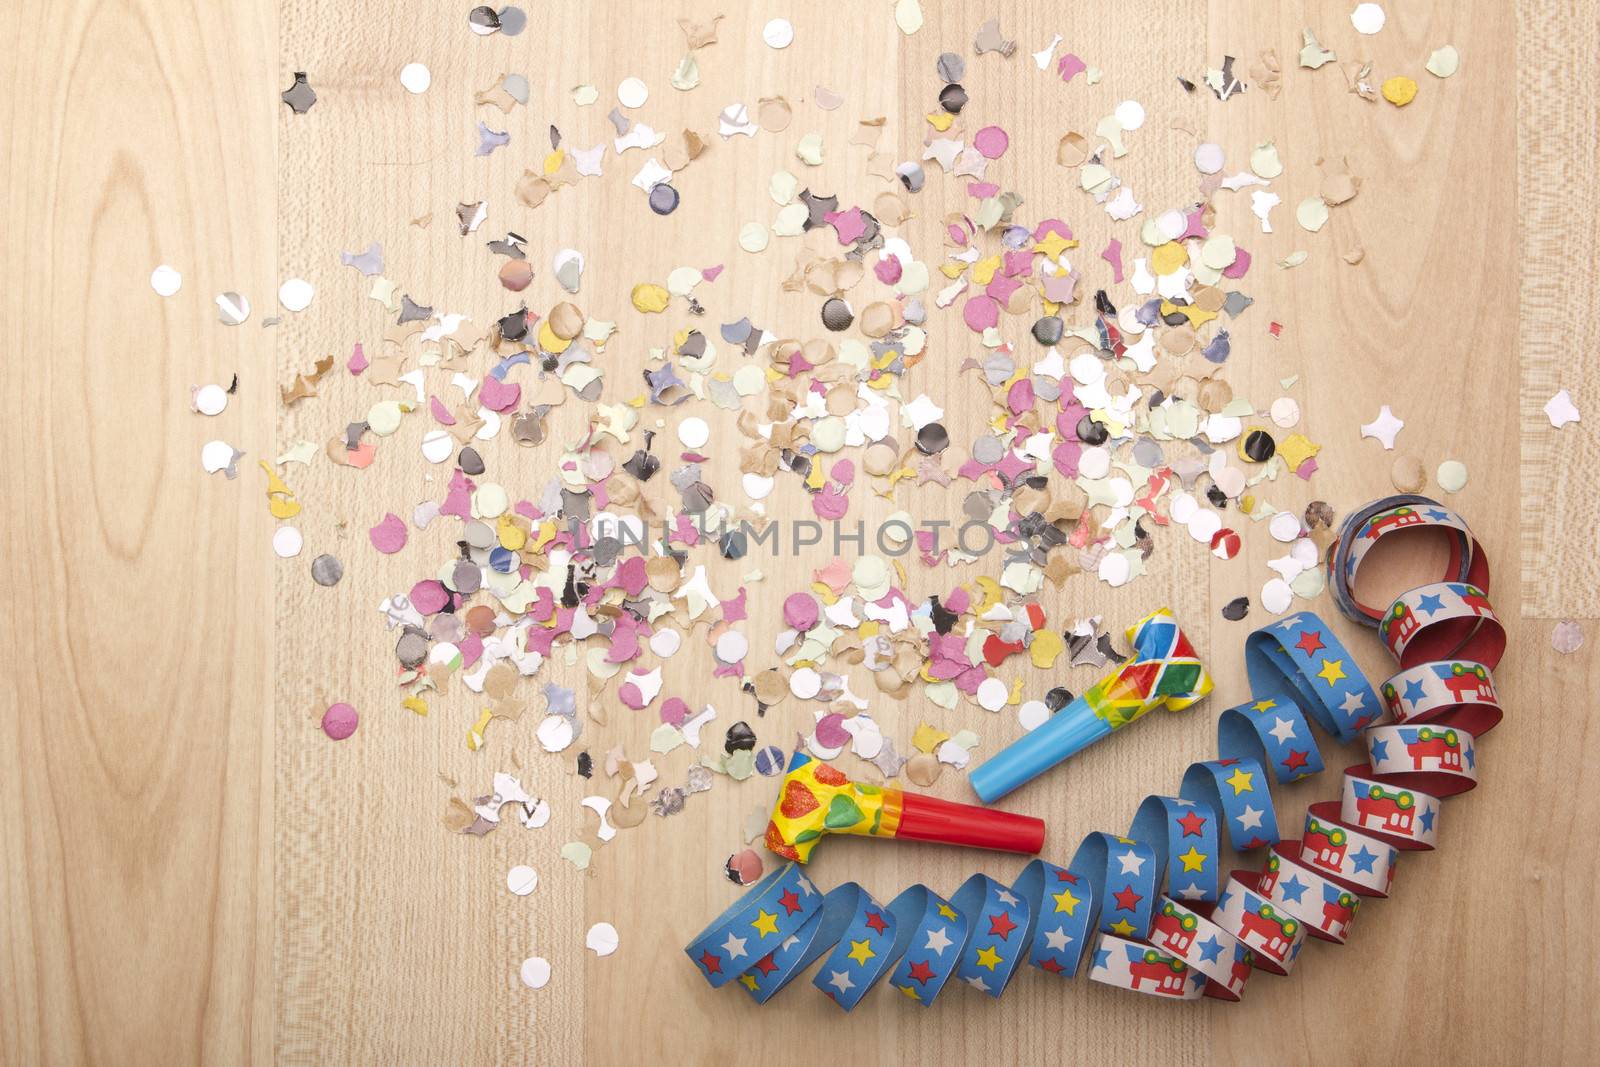 streamers and confetti as decoration for parties, sylvester with wooden background